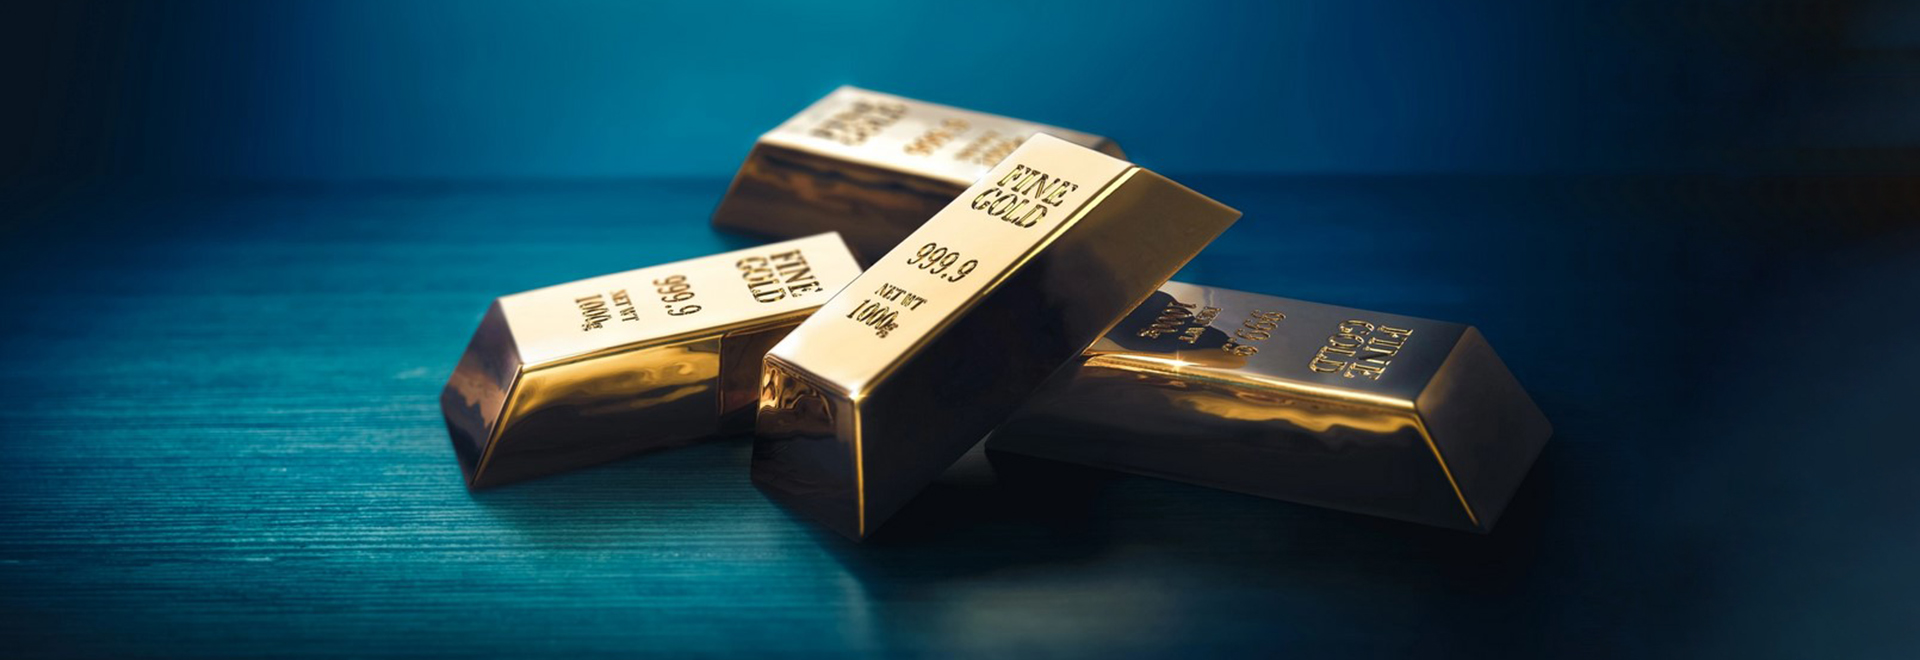 Retreat In Gold Prices Sparked Discussions Among Investors